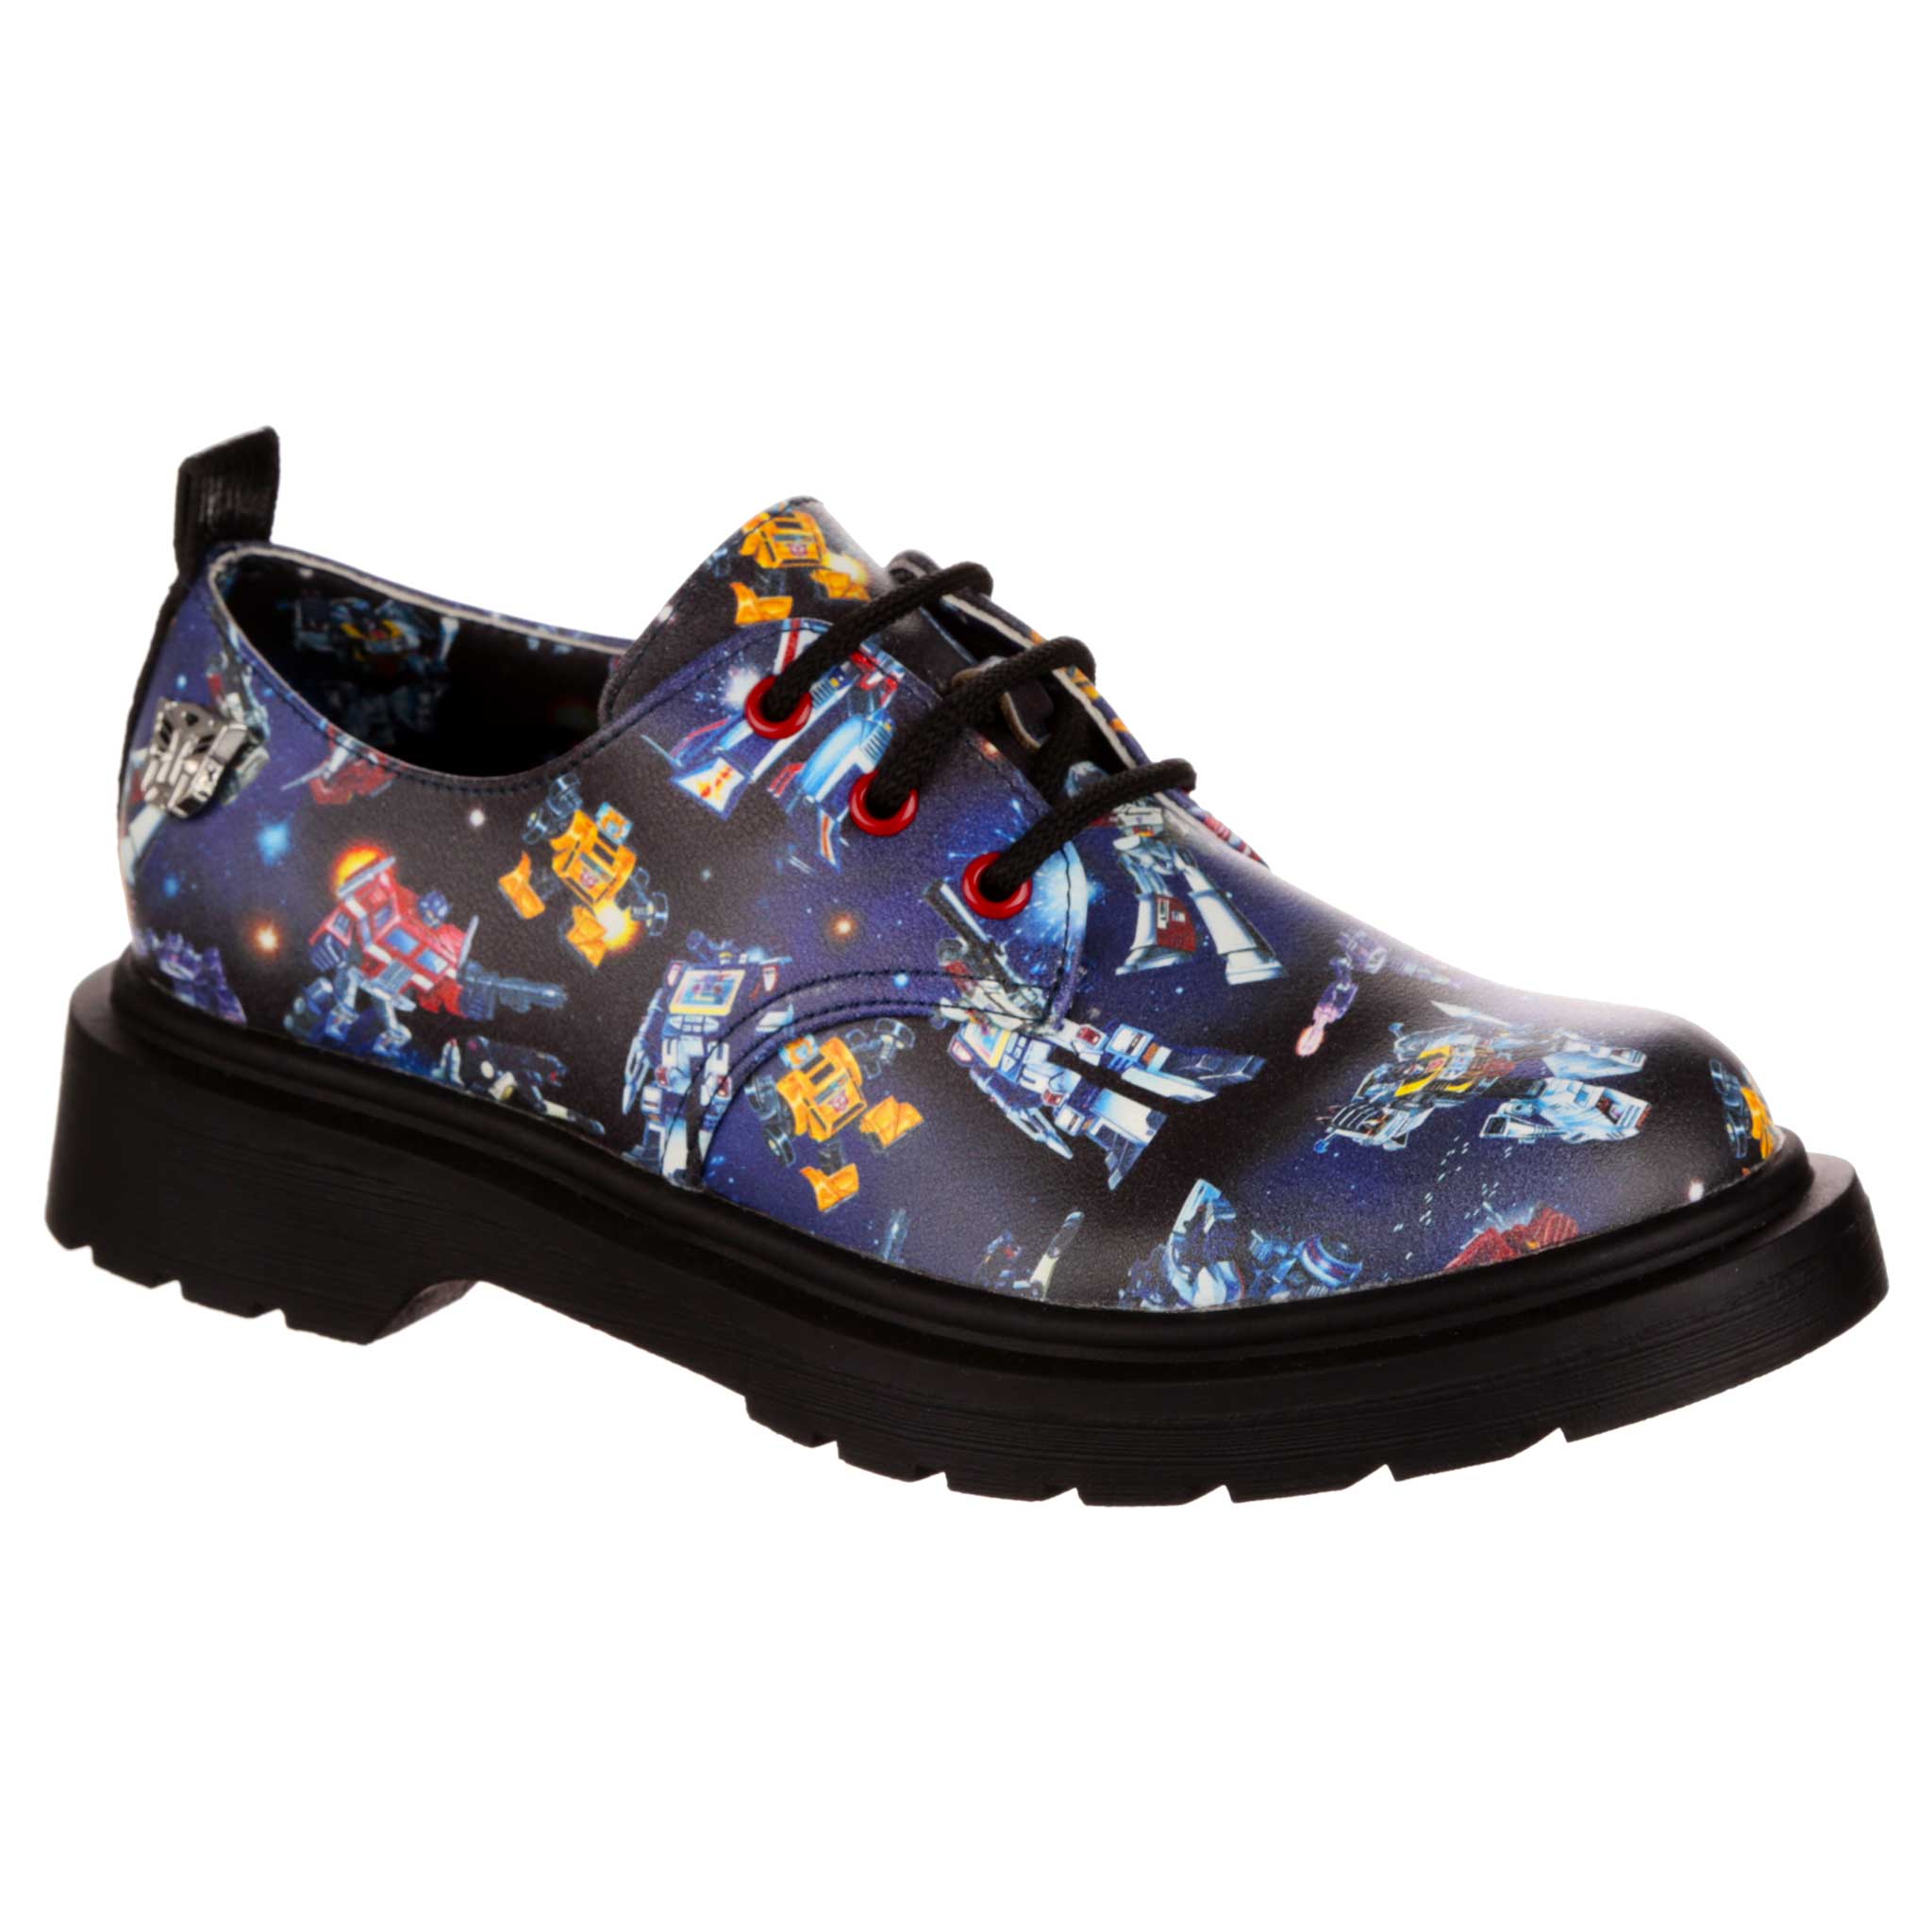 A dark blue flat loafer style shoe with black laces, red eyelets and a black chunky sole. An eighties comic strip print depicting a Transformers battle in space covers the shoe with a blue Transformers lining and pull on tab. 